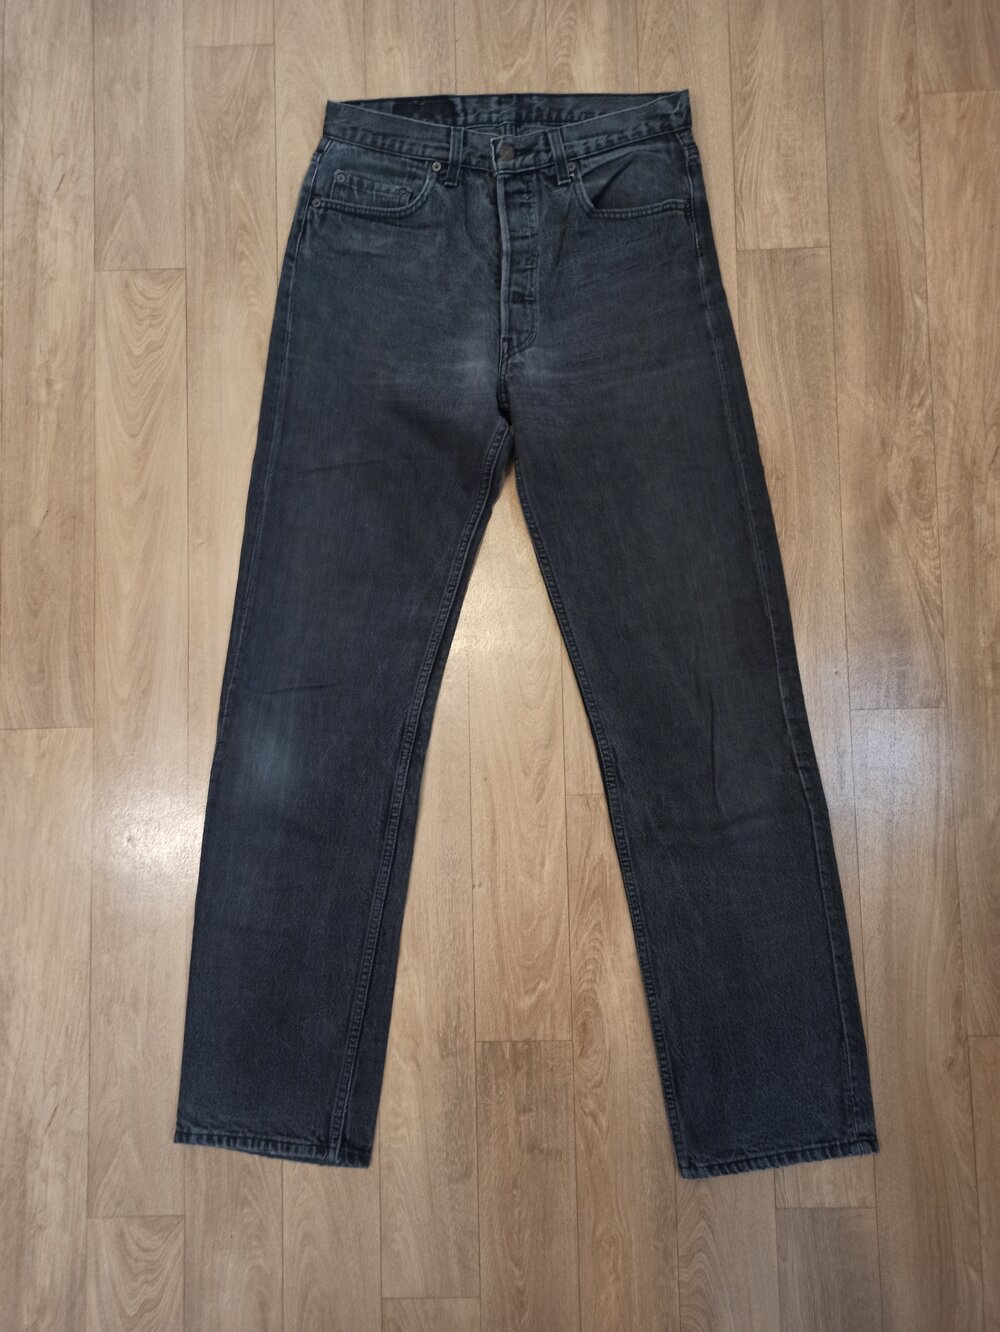 pion verdiepen Paard 80's Levi's 501s Faded Black "Made in USA" Denim (W33 L34) — Holystic  Approach